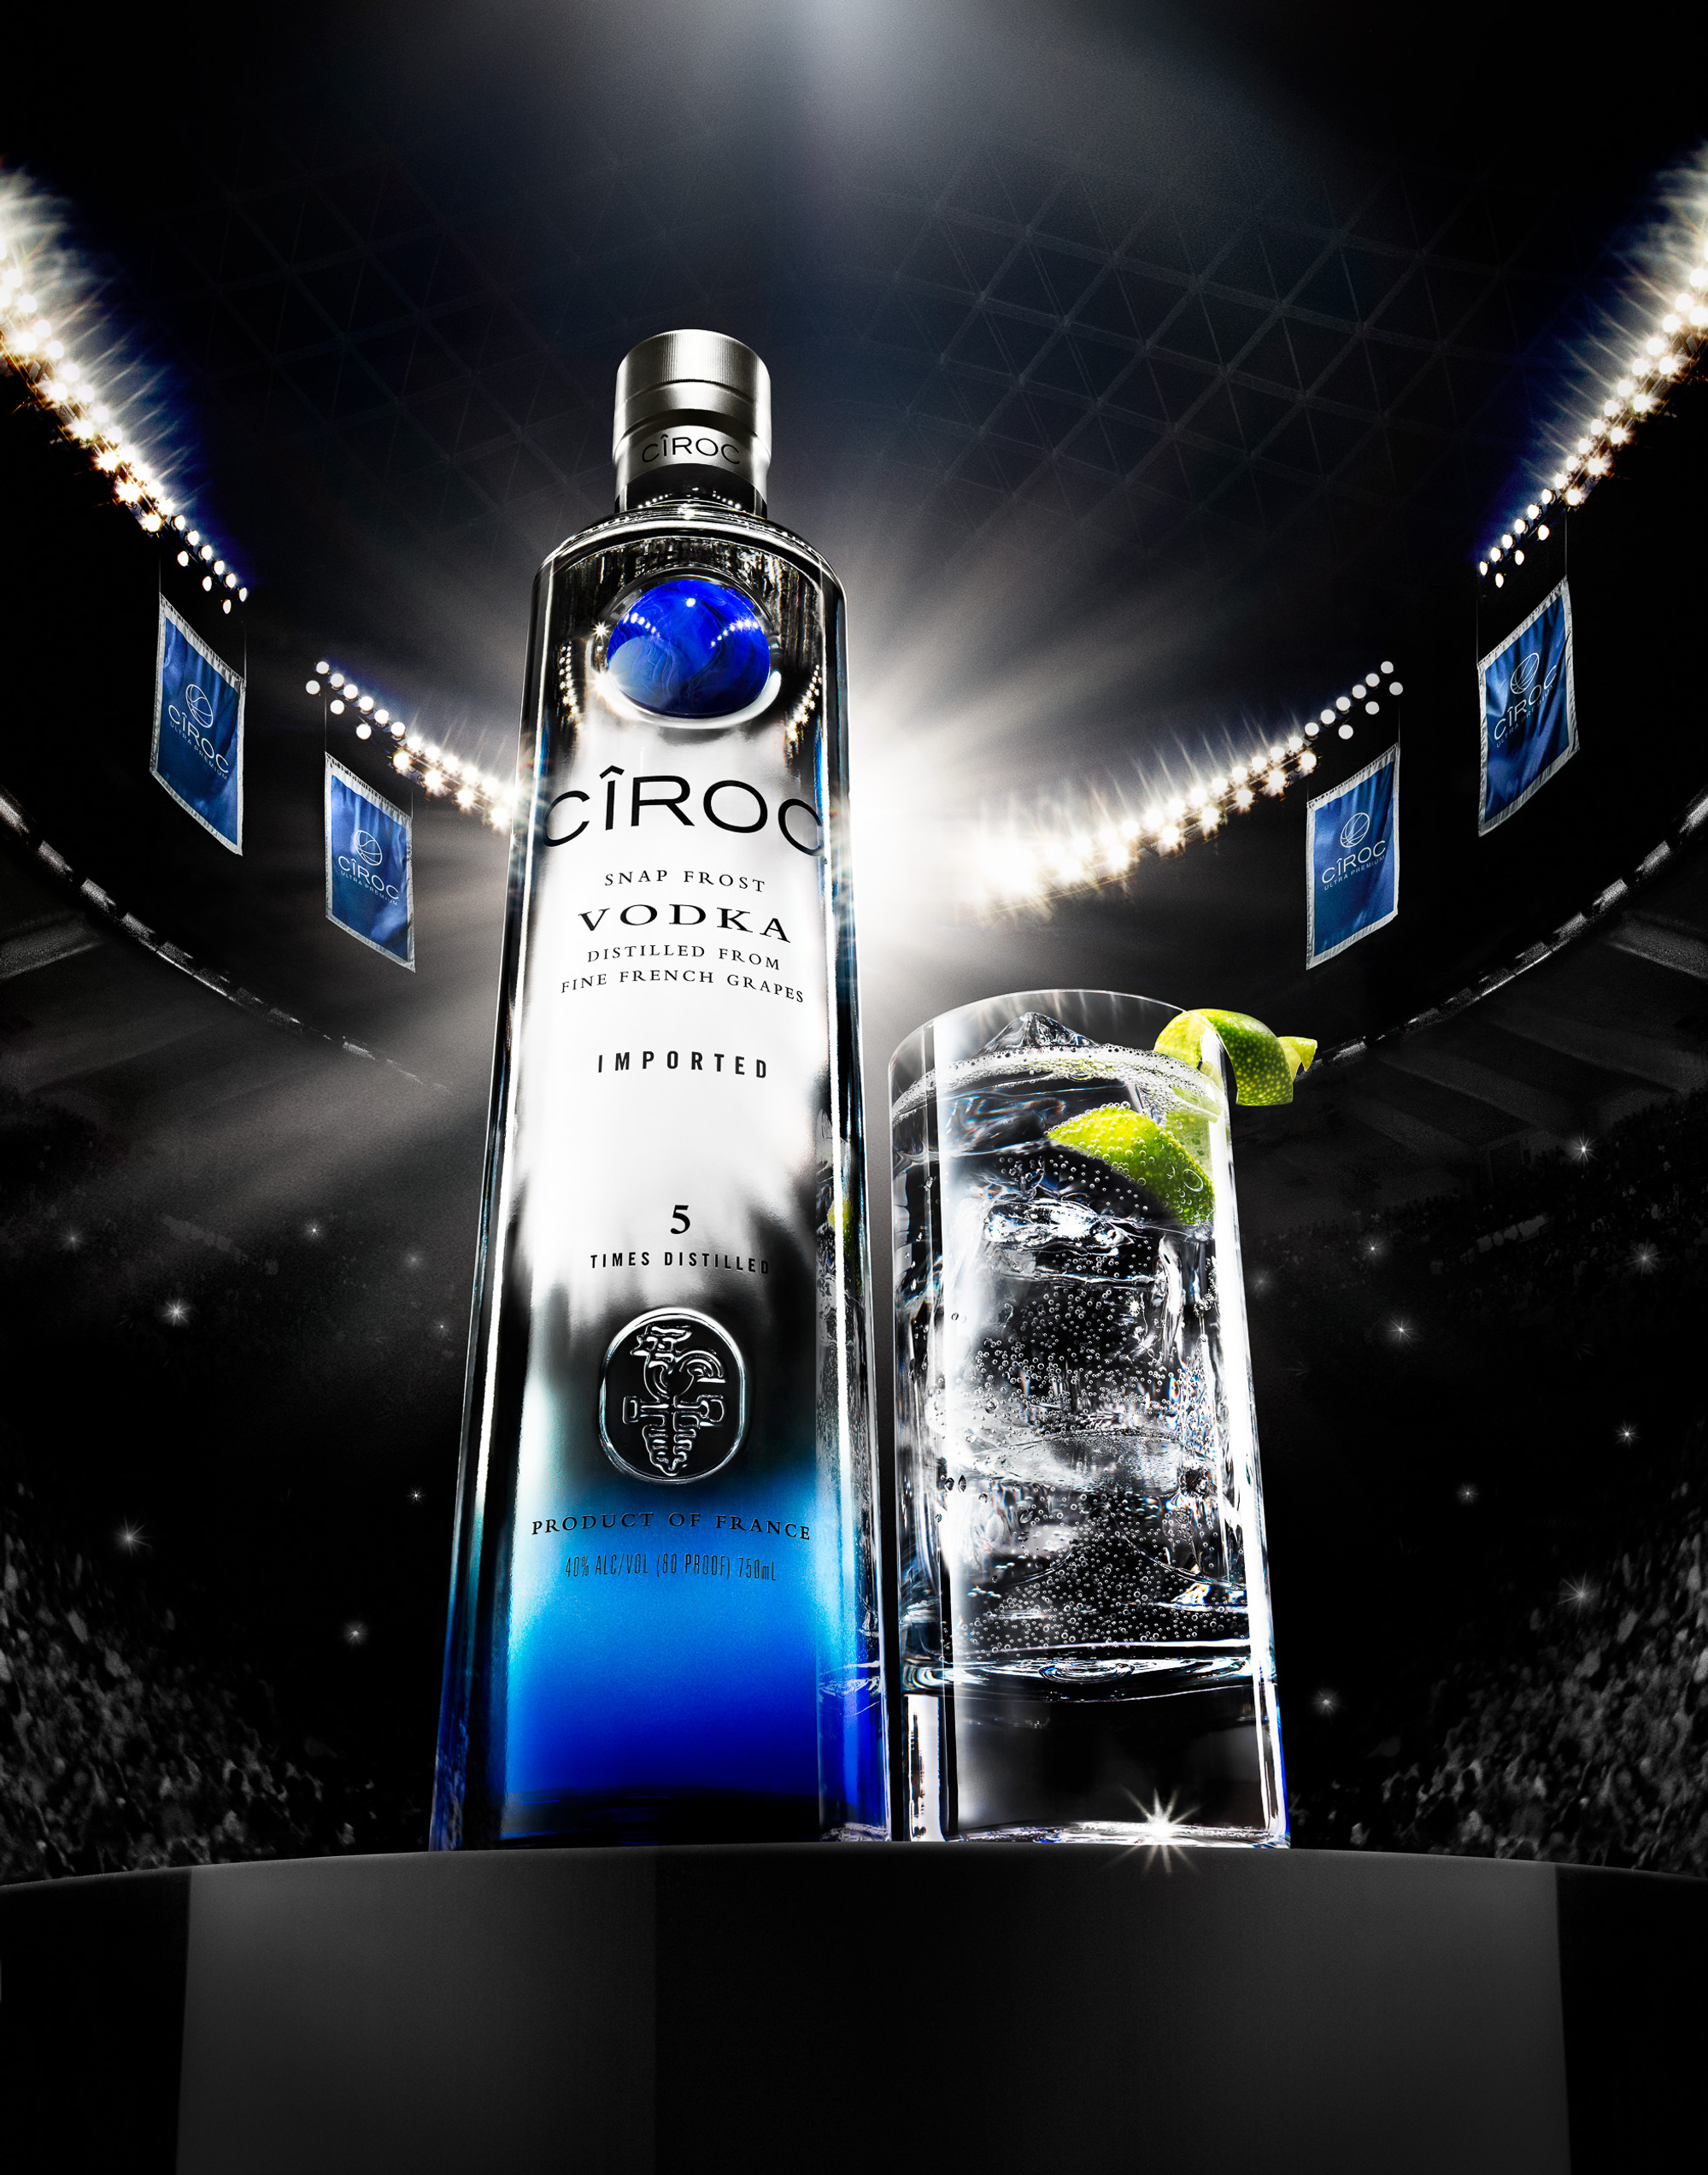 Ciroc Snap Frost Vodka. Beverage & Liquor product advertising photography by Timothy Hogan Studio in Los Angeles